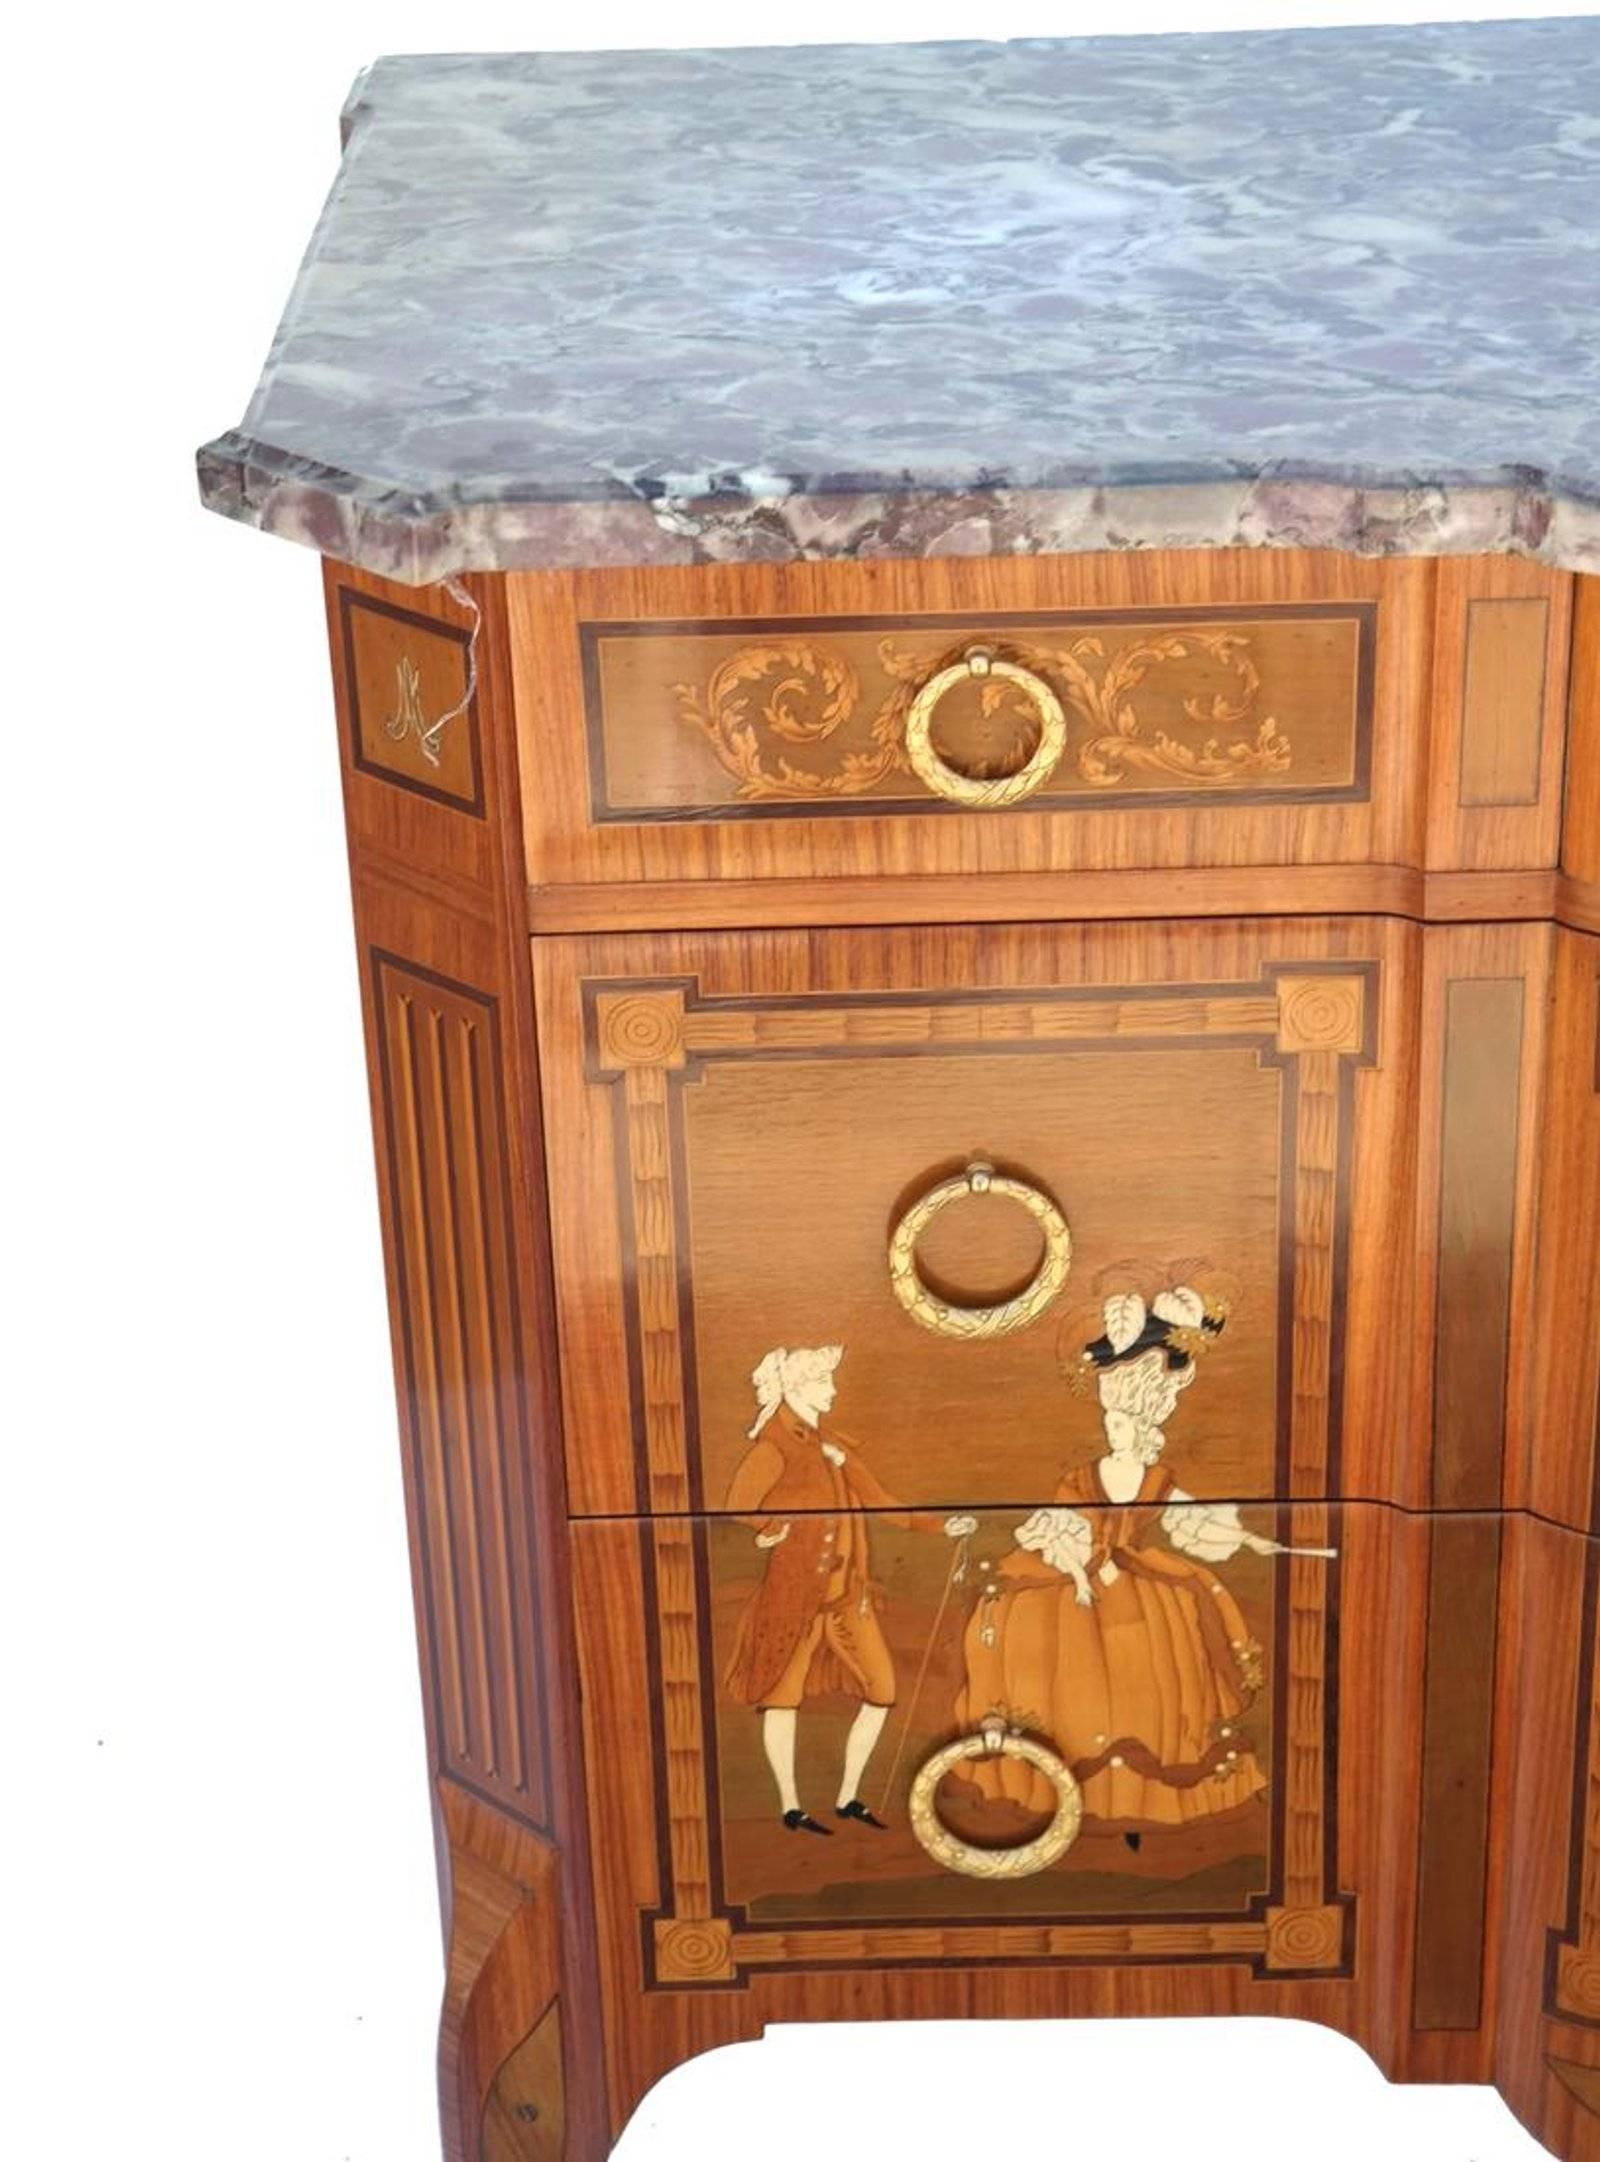 Fine Louis XV-XVI Style Transitional Marquetry Inlaid Commode with Marble Top In Excellent Condition For Sale In Bridgeport, CT